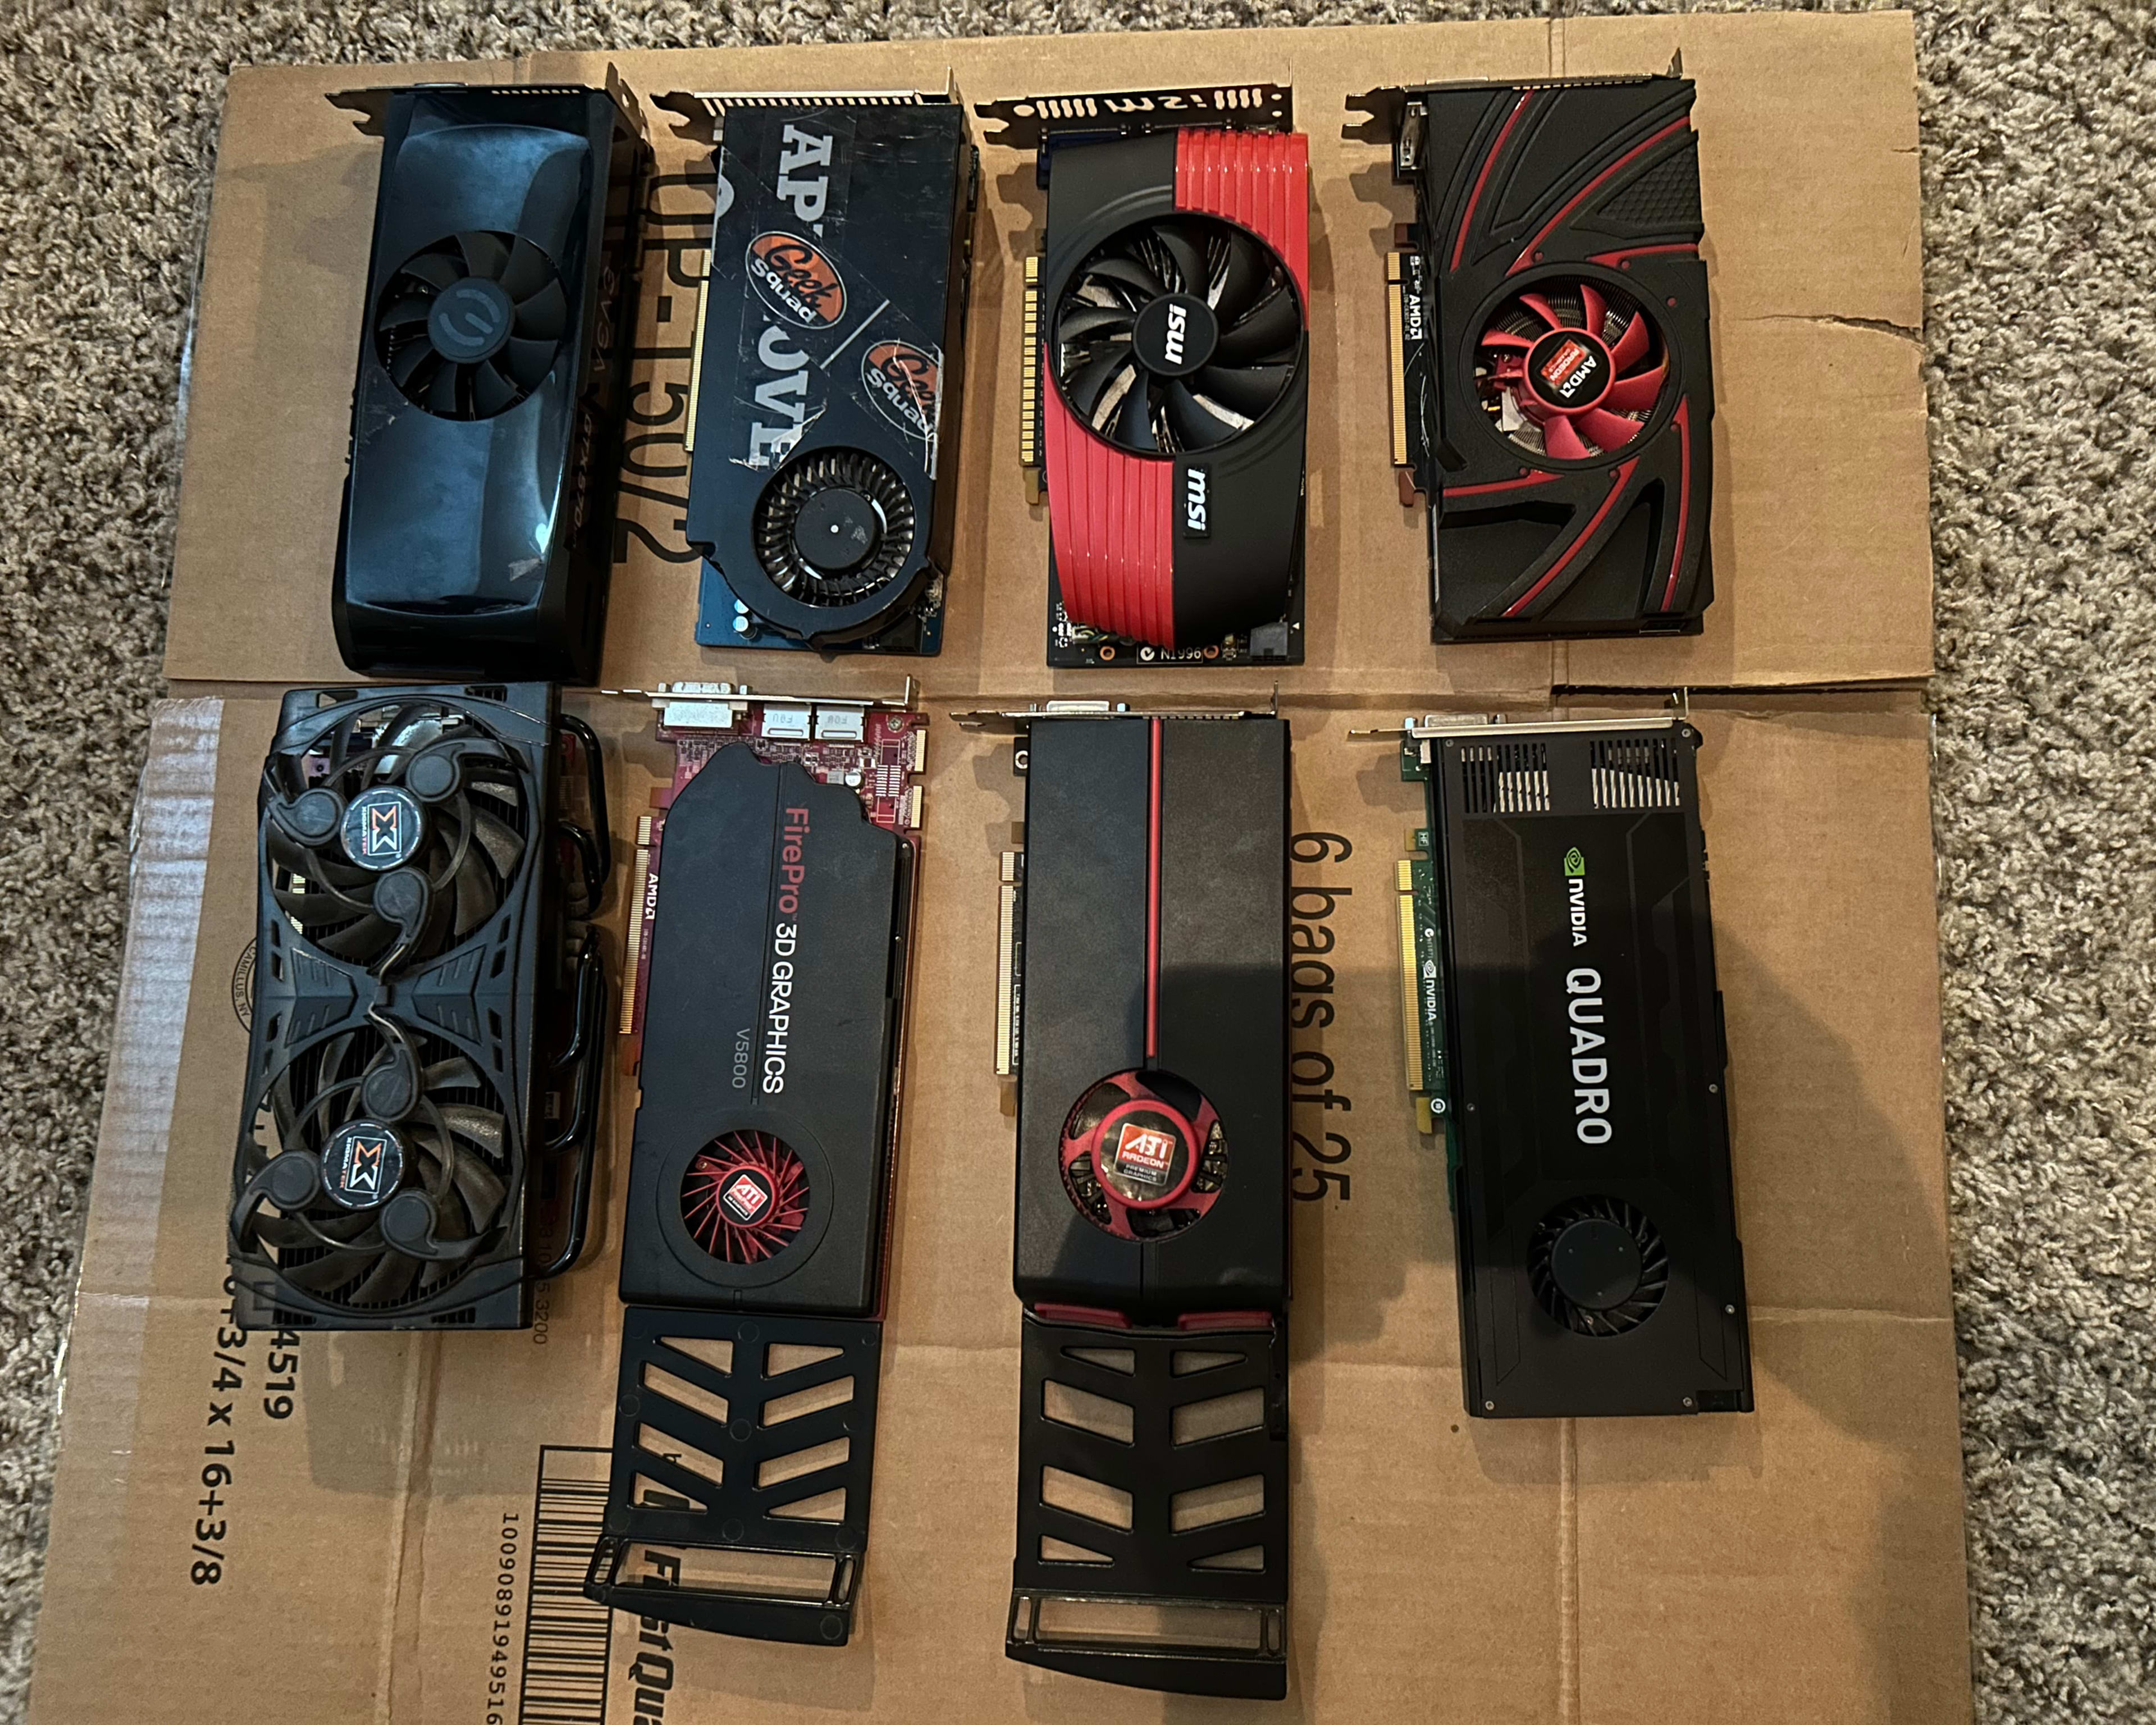 Lot of 10 Graphics Cards-Untested-Selling as is